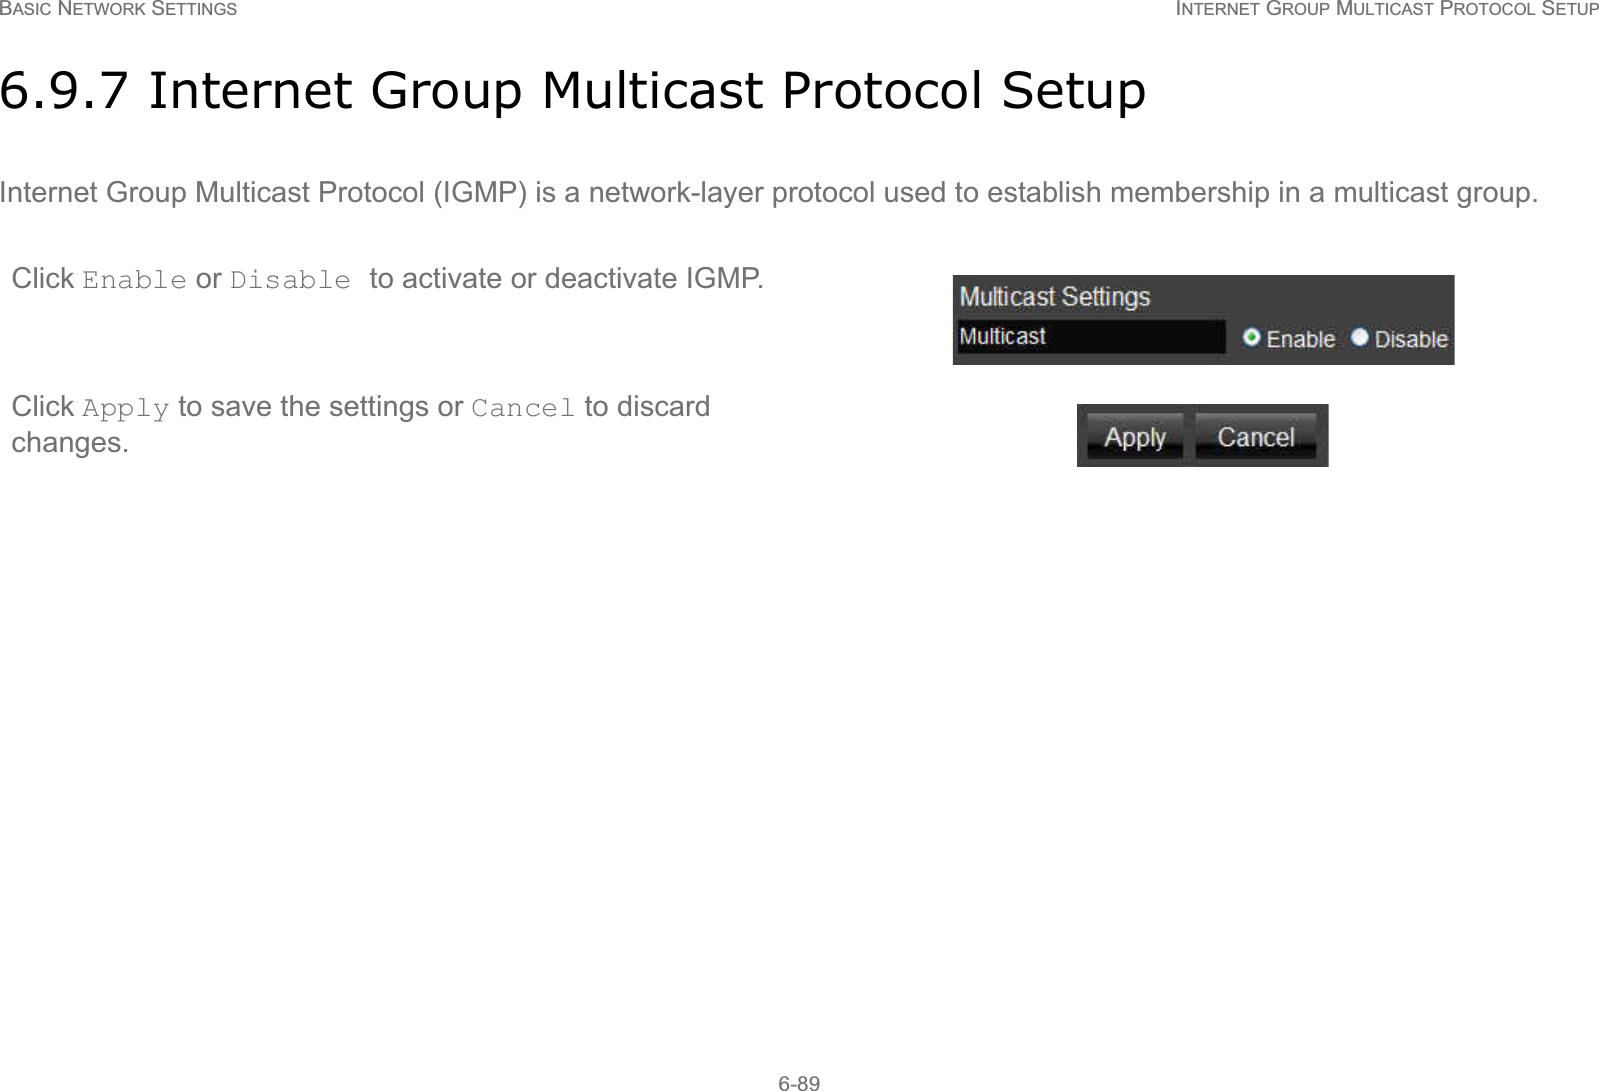 BASIC NETWORK SETTINGS INTERNET GROUP MULTICAST PROTOCOL SETUP6-896.9.7 Internet Group Multicast Protocol SetupInternet Group Multicast Protocol (IGMP) is a network-layer protocol used to establish membership in a multicast group.Click Enable or Disable to activate or deactivate IGMP.Click Apply to save the settings or Cancel to discard changes.